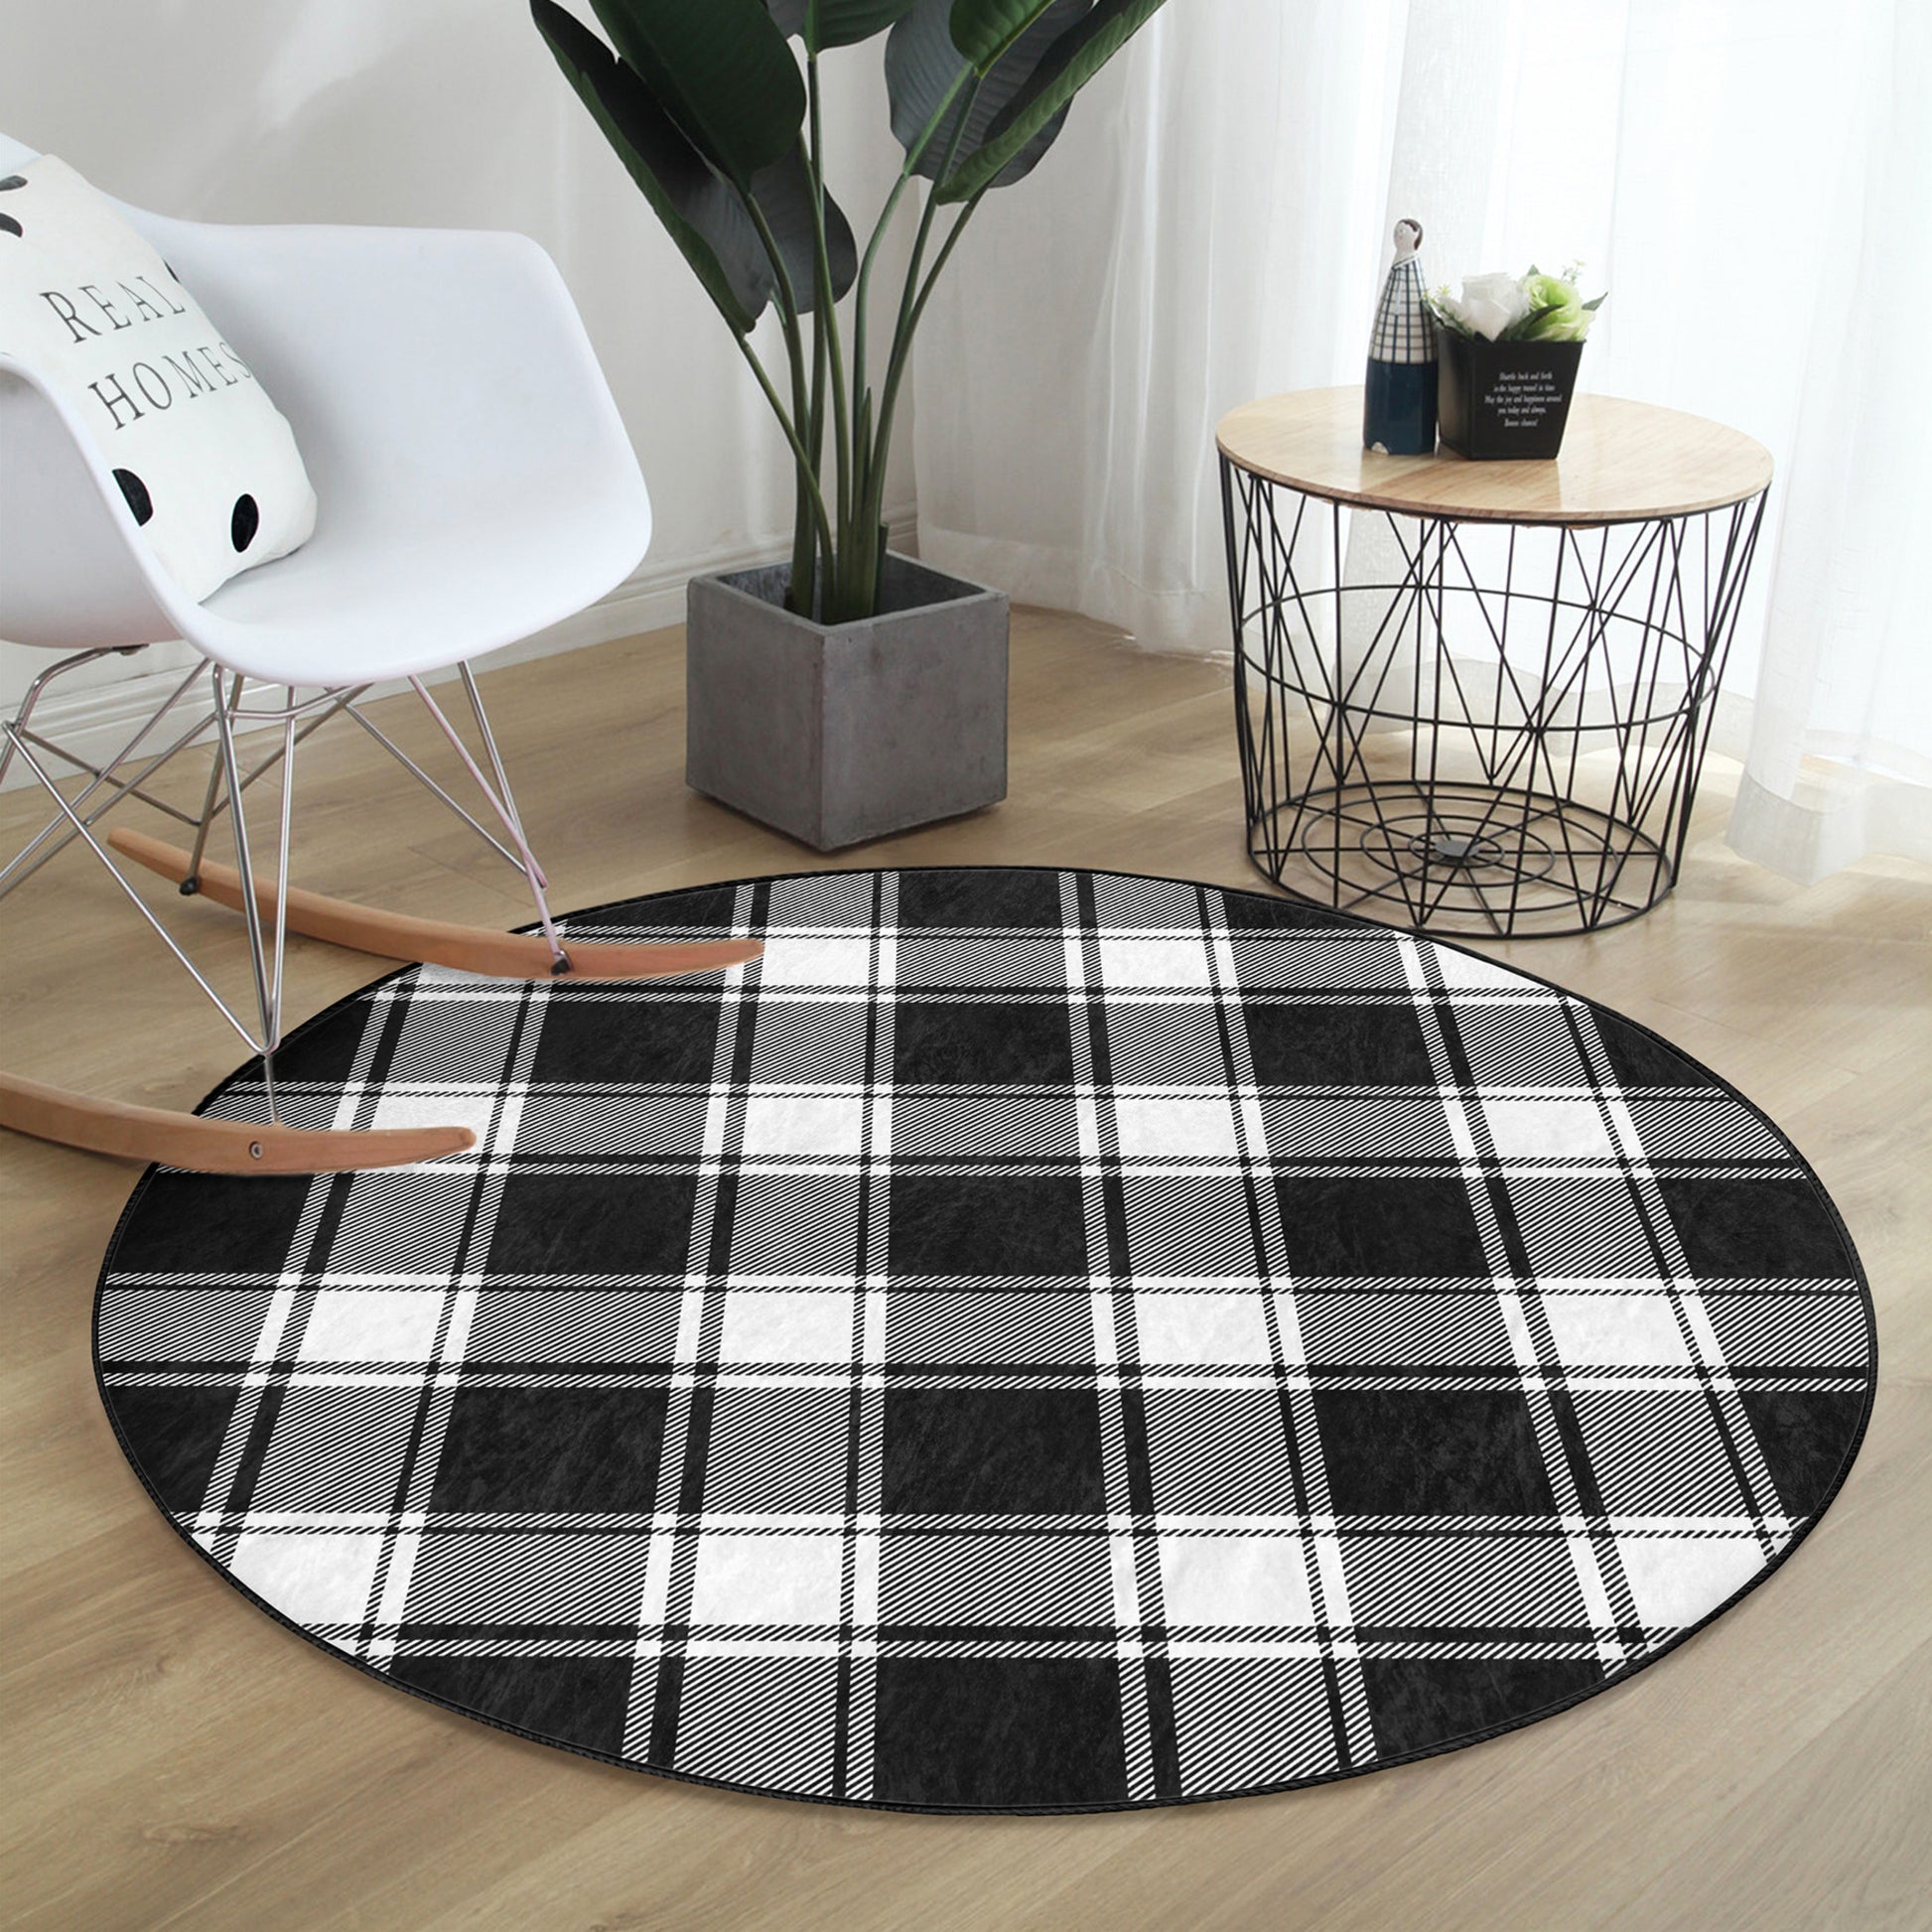 Soft & Durable Homeezone Rug - Modern Home Accent